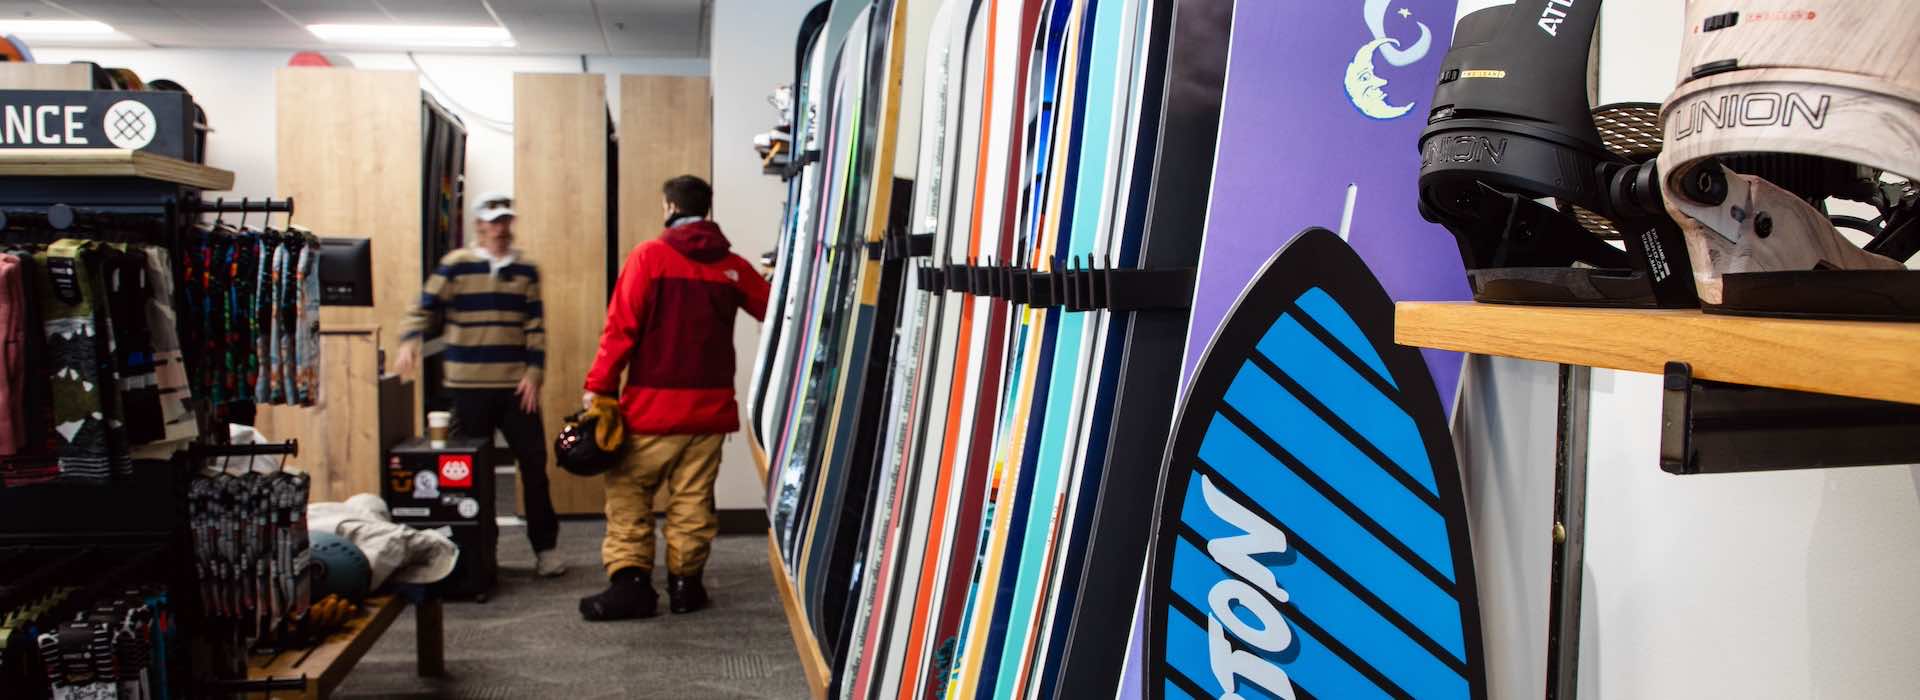 The Rider's Room Snowboard Shop